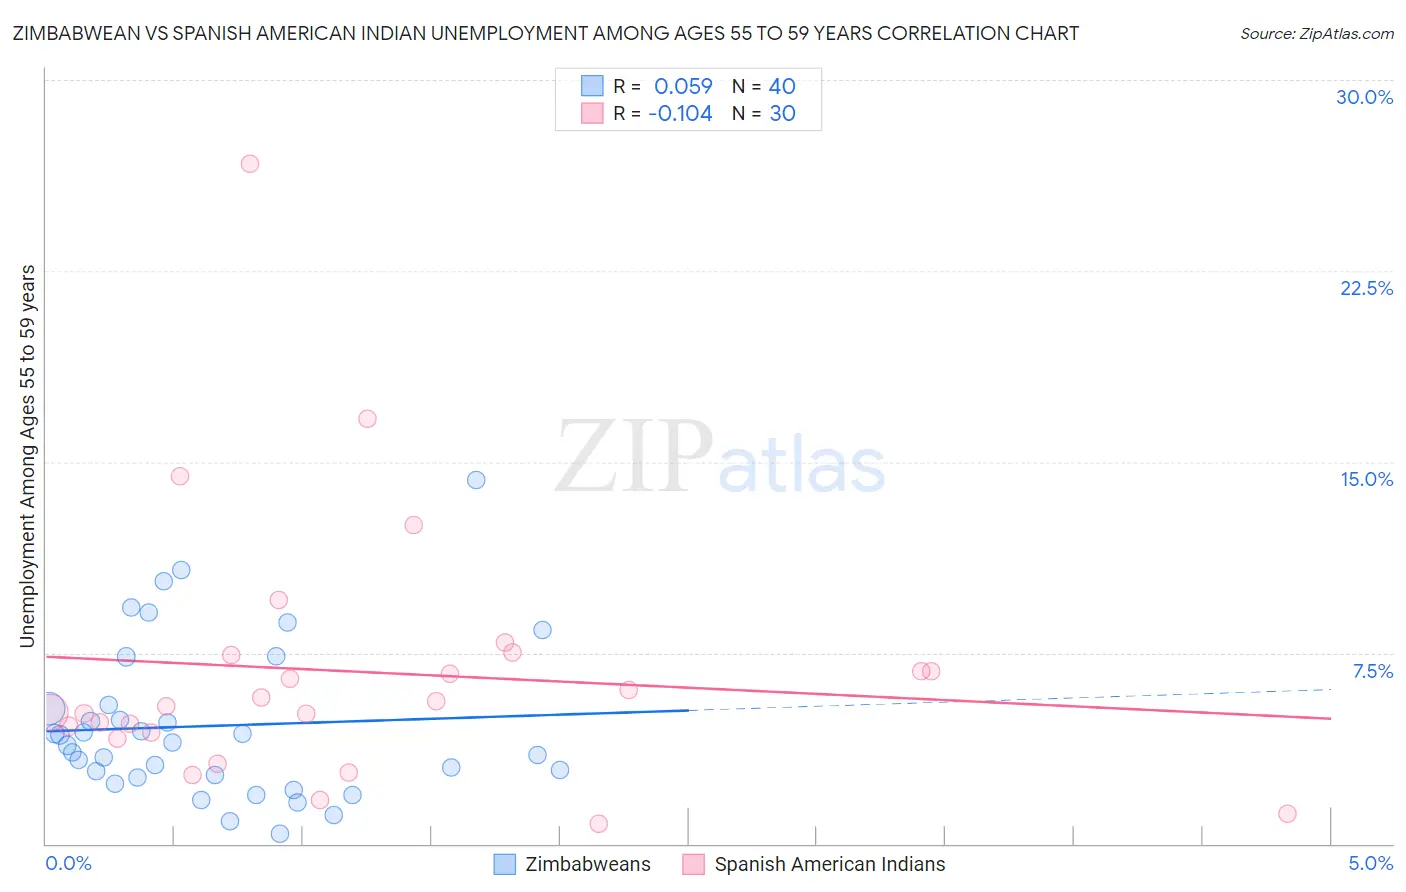 Zimbabwean vs Spanish American Indian Unemployment Among Ages 55 to 59 years